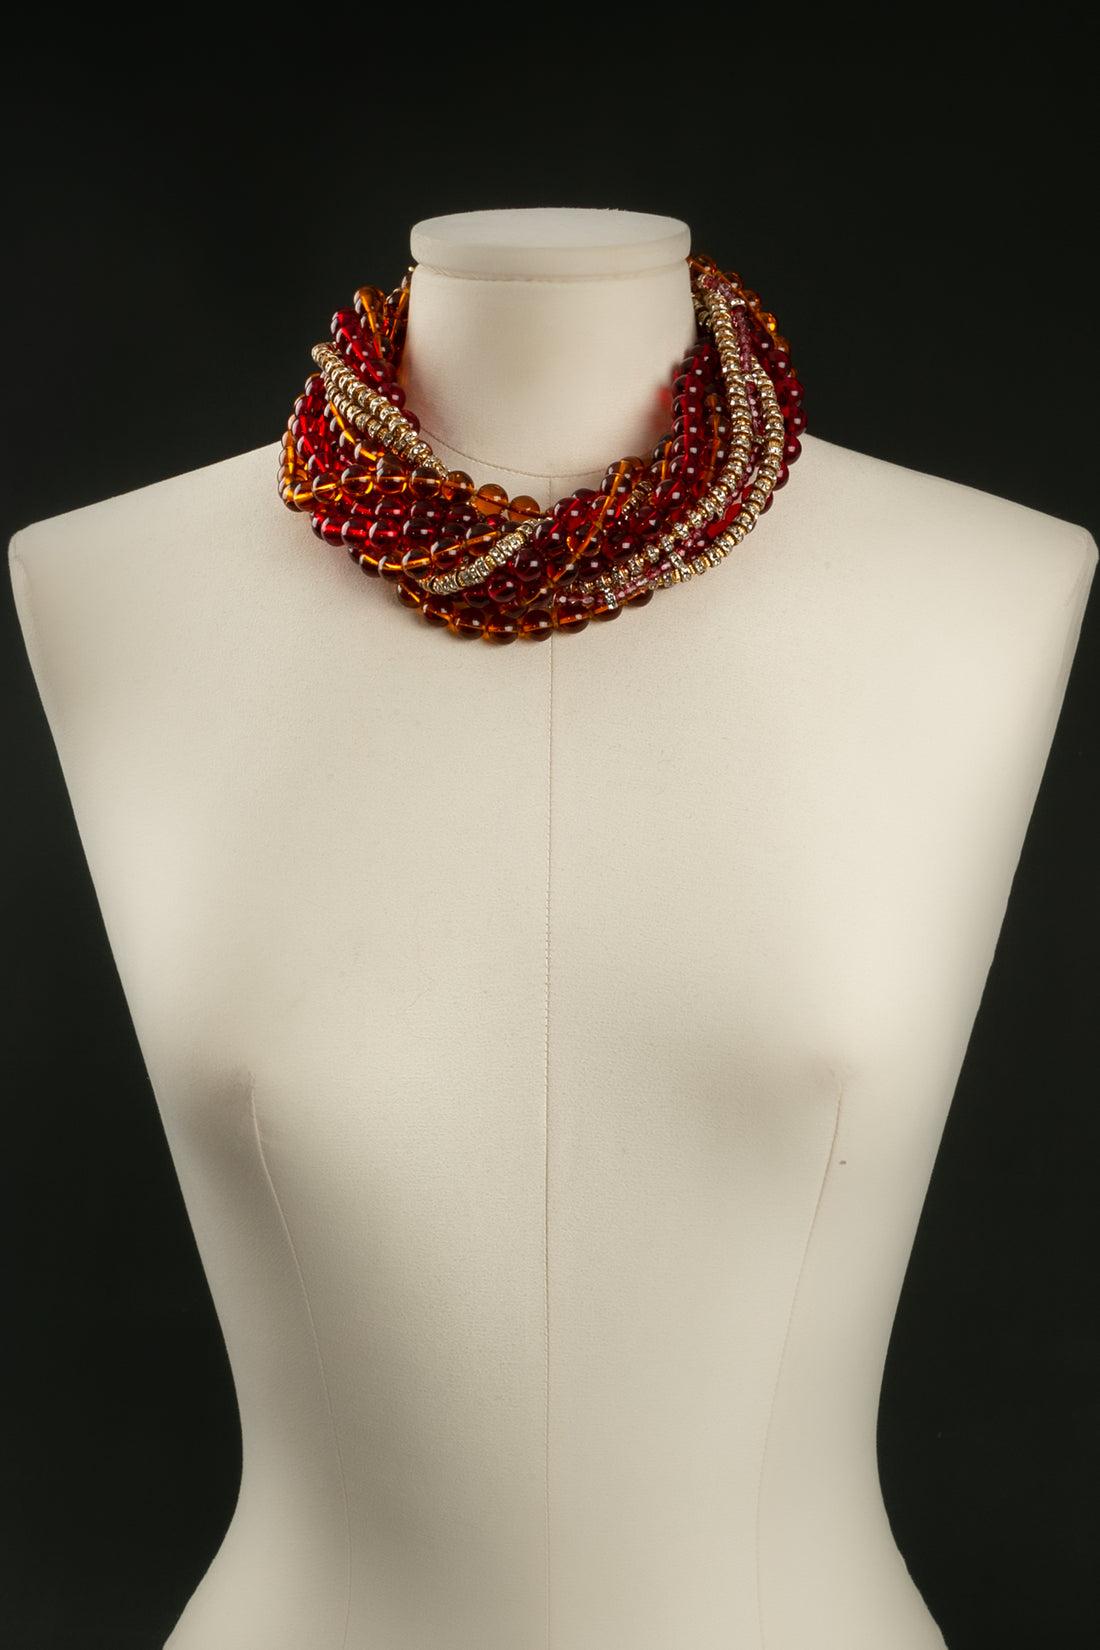 Christian Dior - Gilded metal short necklace comprised of glass paste beads in red and orange tones with spacers. The clasp is in openwork gilded metal paved with rhinestones.

Additional information: 

Dimensions: 
Length: 45 cm to 48 cm (17.71